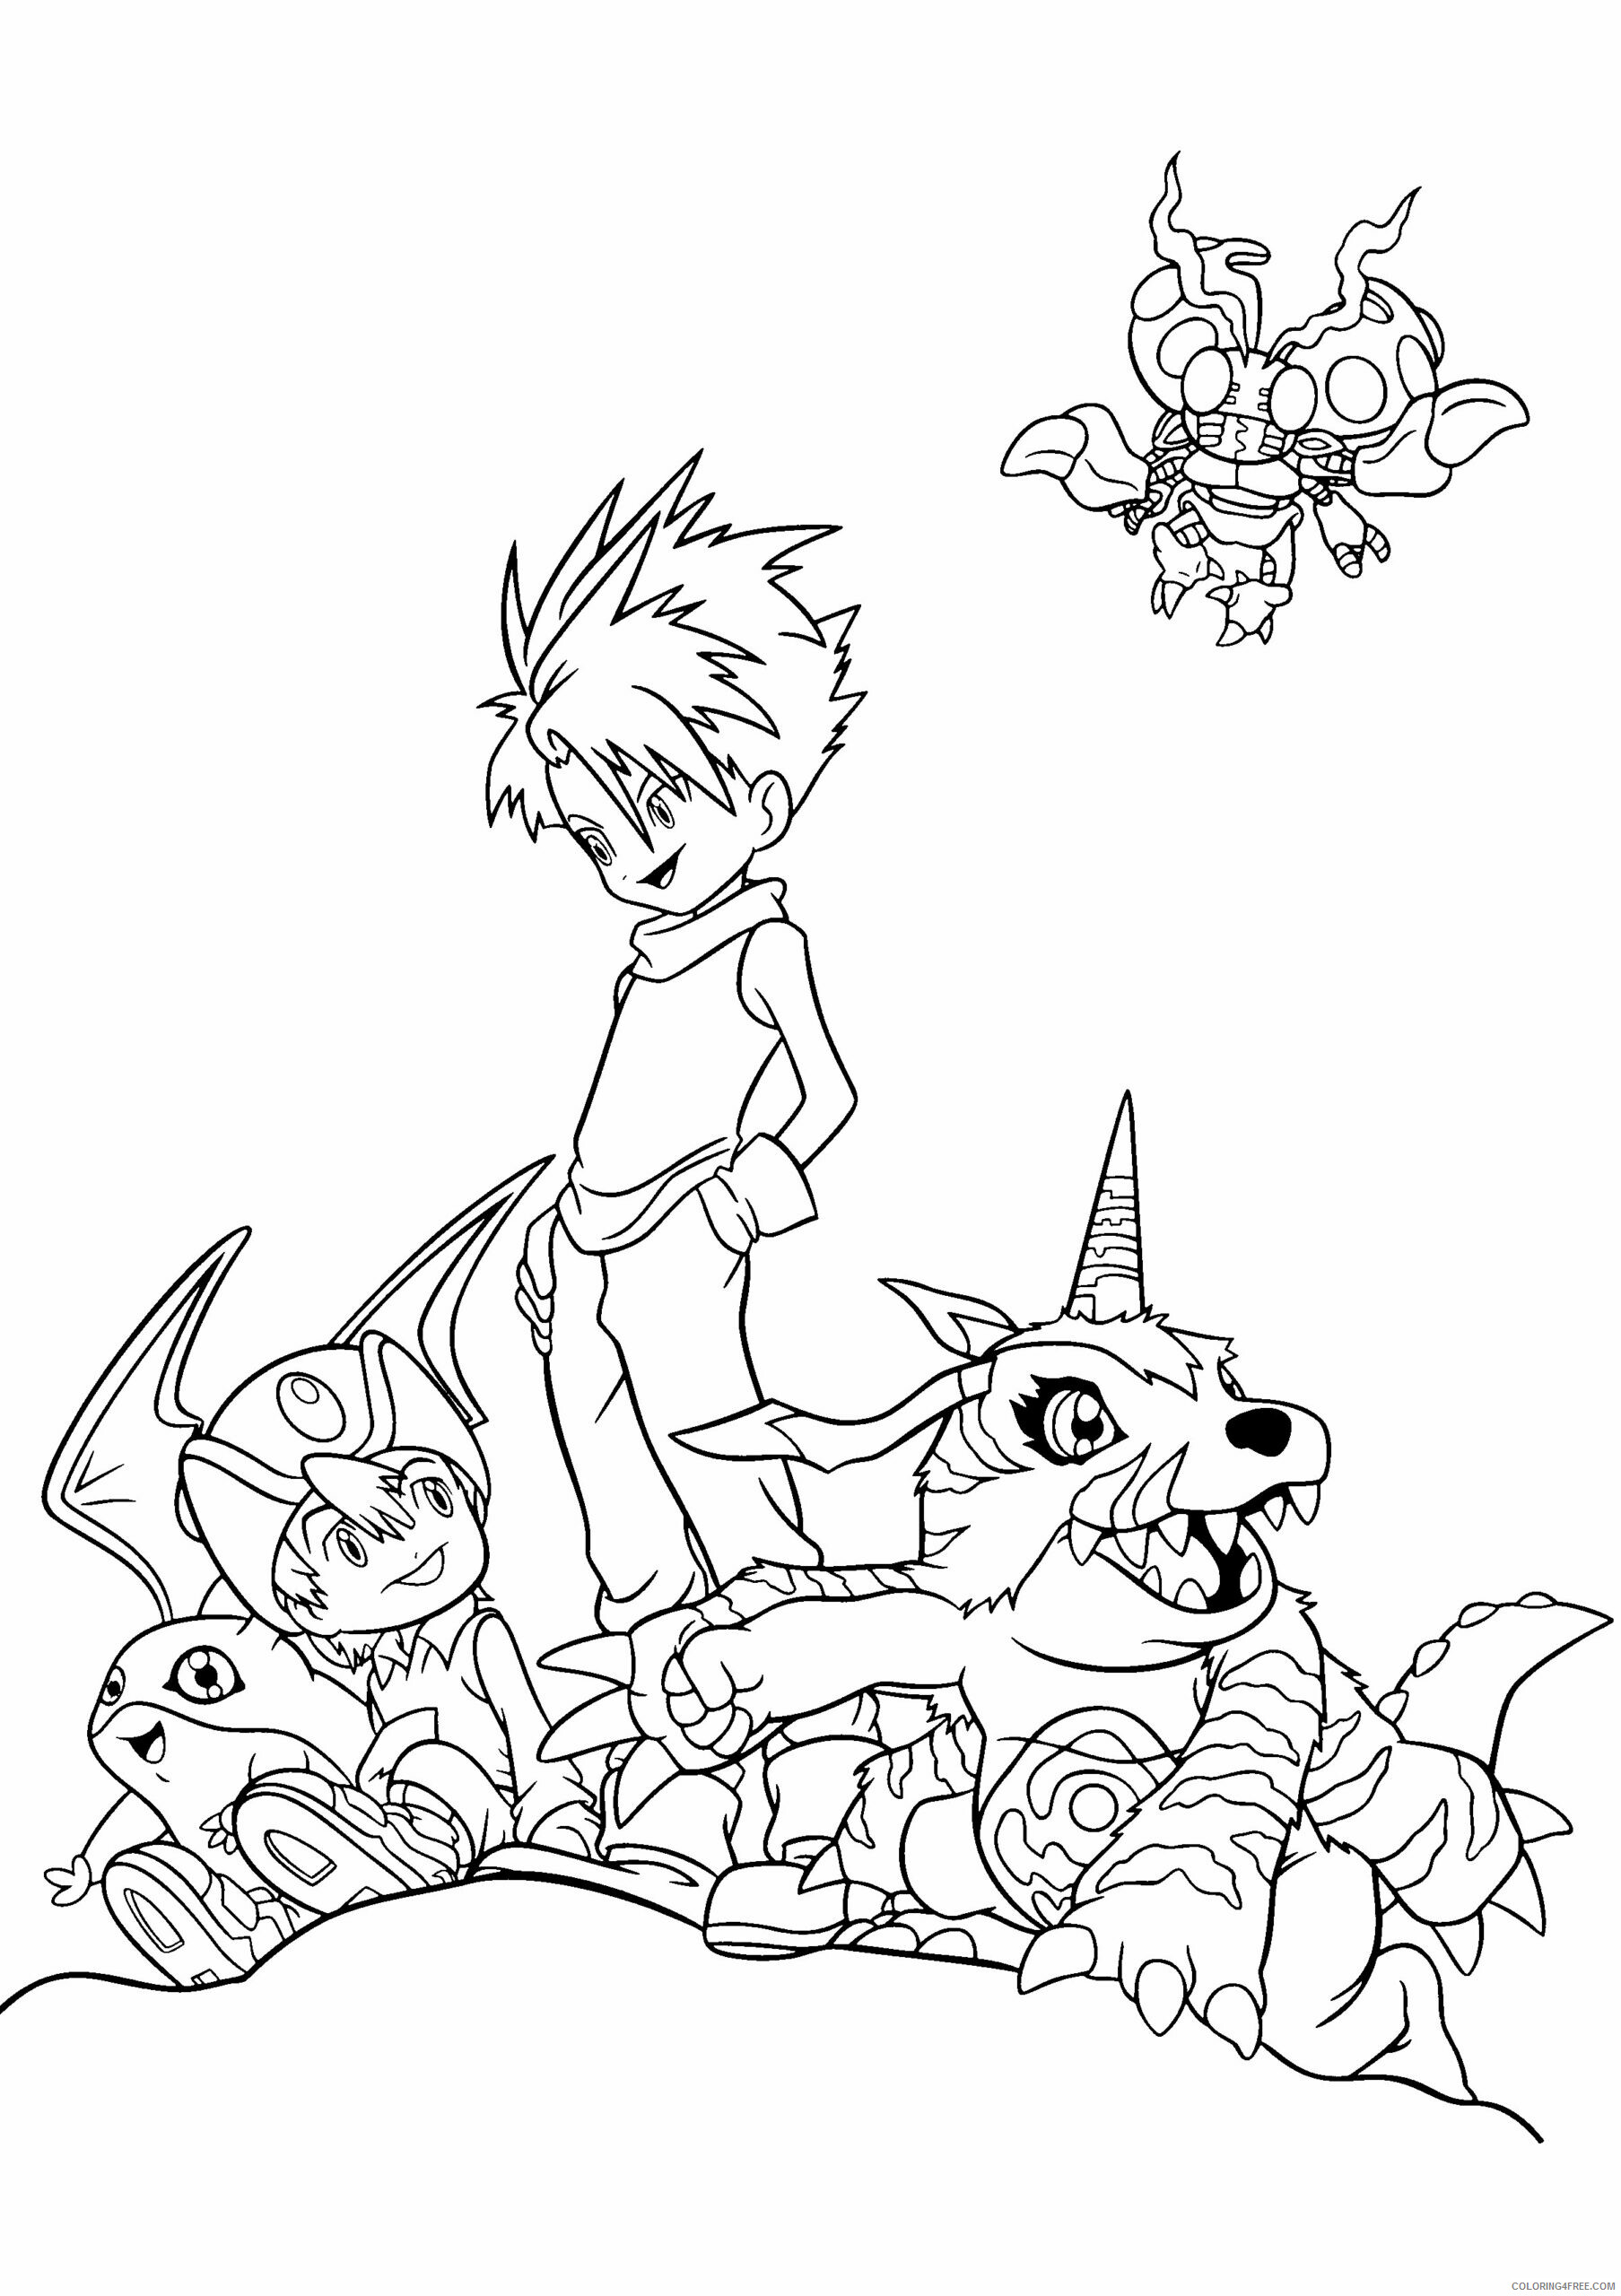 Digimon Printable Coloring Pages Anime digimon w1OFK 2021 0193 Coloring4free